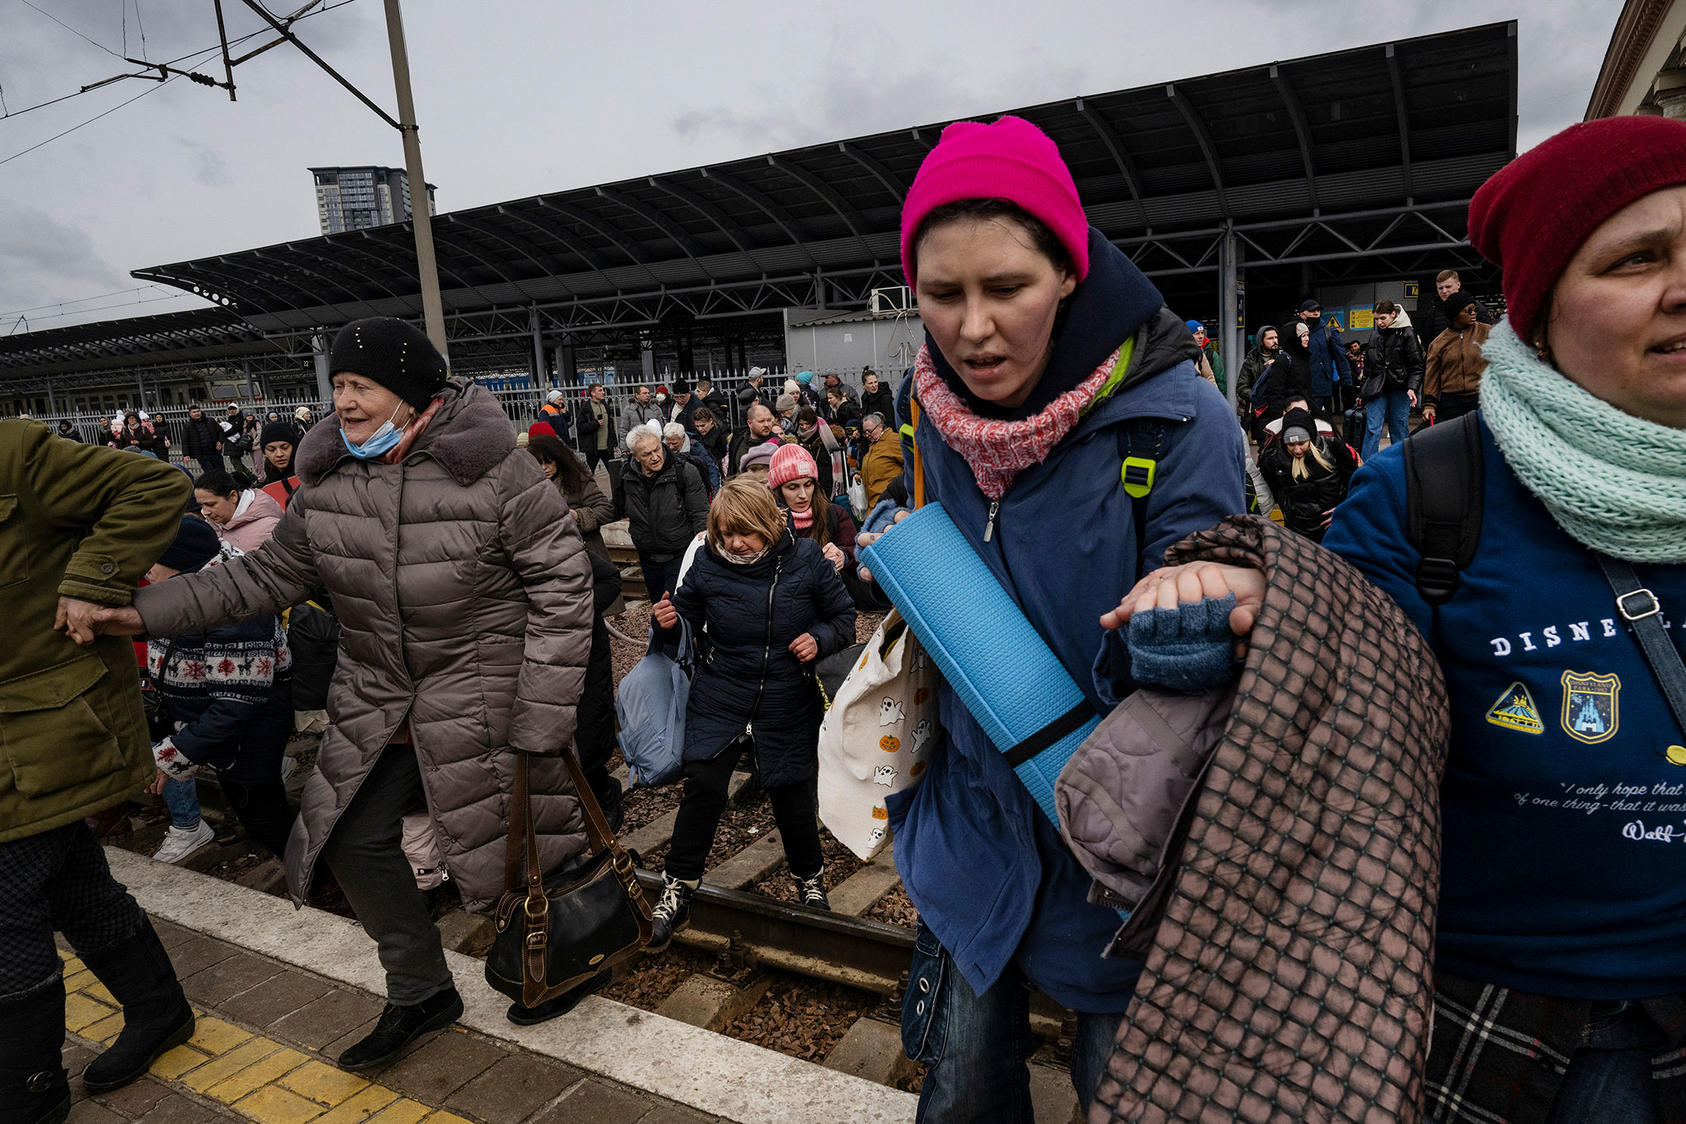 Families rush across train tracks to get to the next train heading west toward Lviv at the main train station in Kyiv, March 4, 2022. (Lynsey Addario/The New York Times)